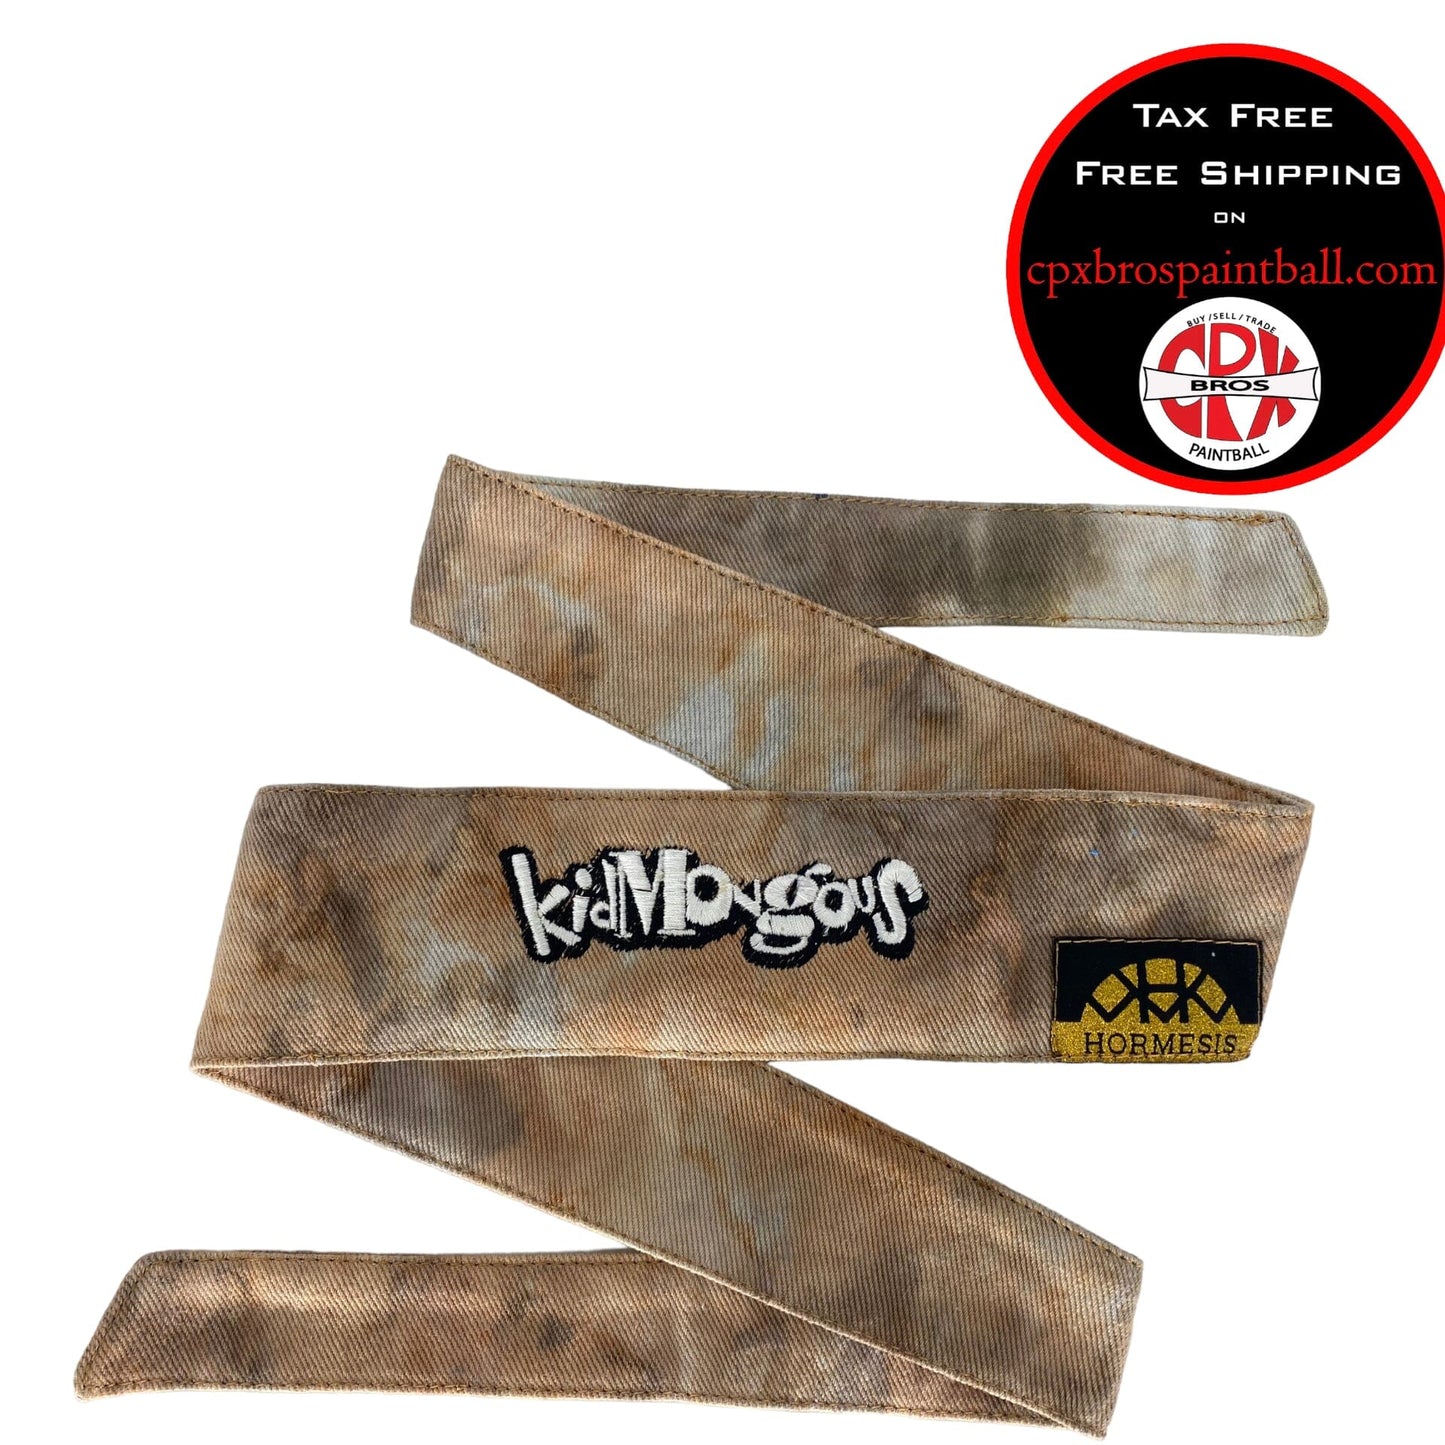 Used Hormesis Headband - The Kidmongous Series - The Blockbuster (129/177) Paintball Gun from CPXBrosPaintball Buy/Sell/Trade Paintball Markers, Paintball Hoppers, Paintball Masks, and Hormesis Headbands